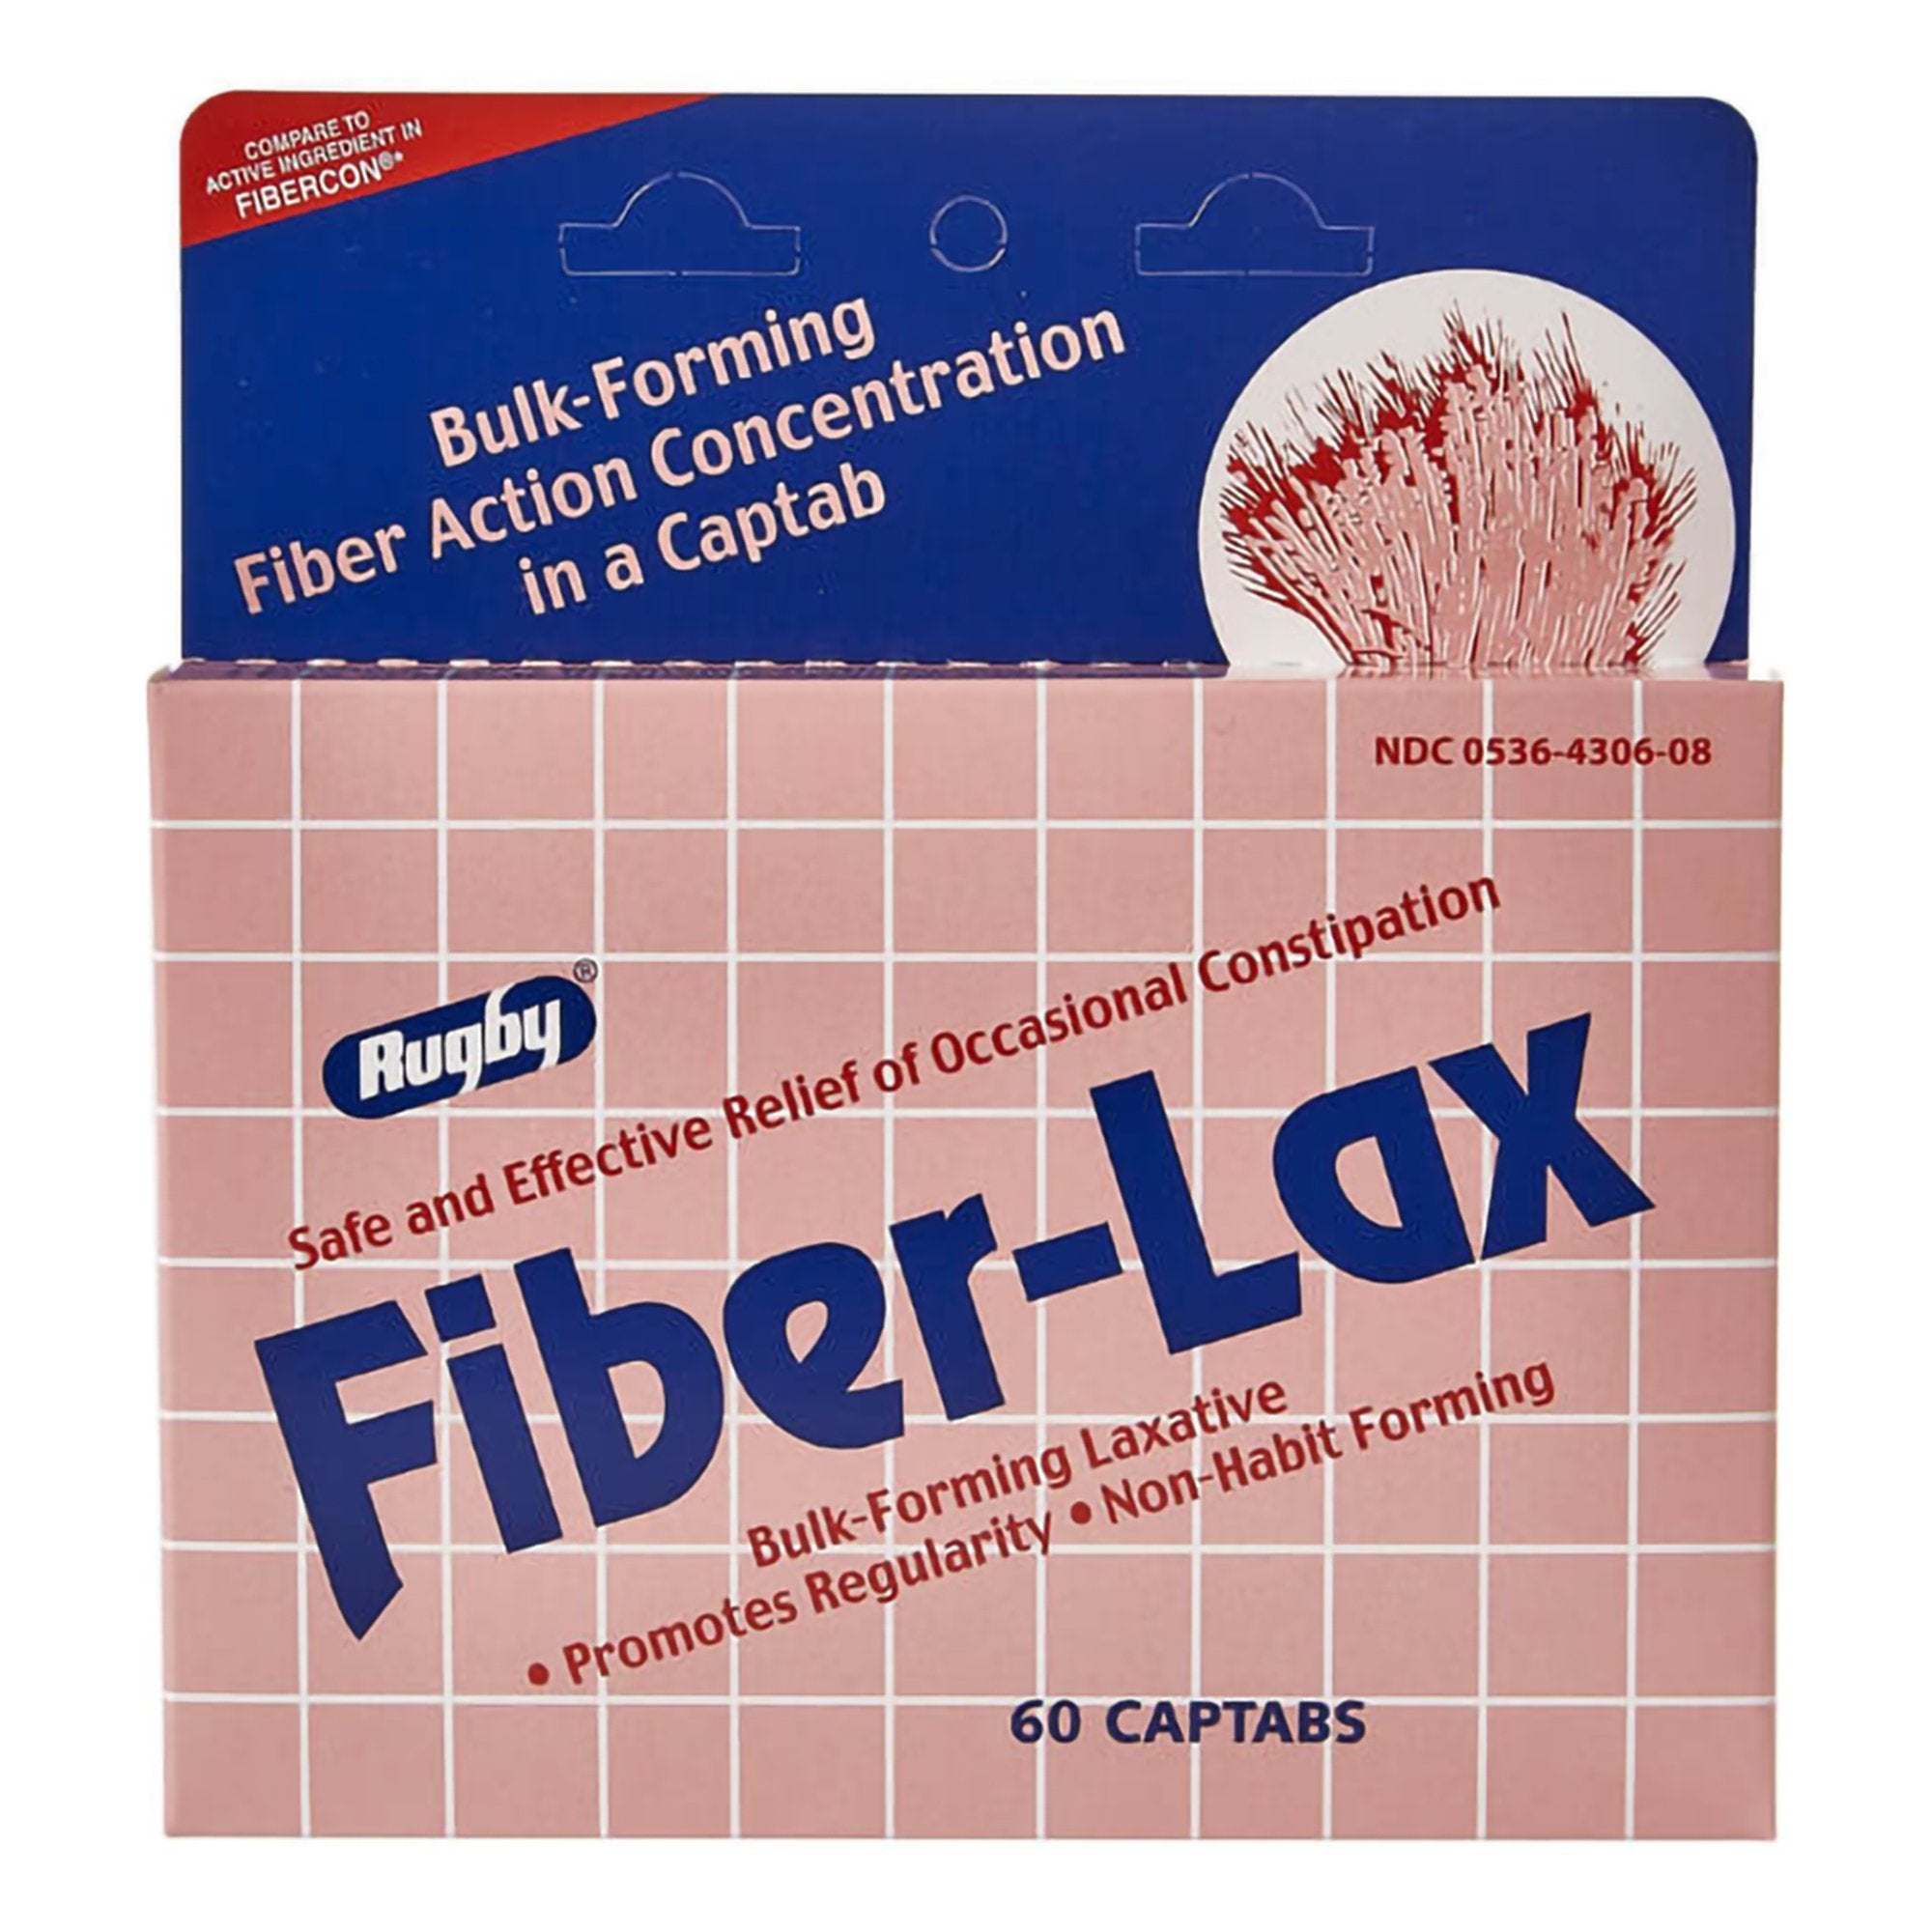 Laxative Fiber-Lax Tablet 60 per Bottle 500 mg Strength Calcium Polycarbophil